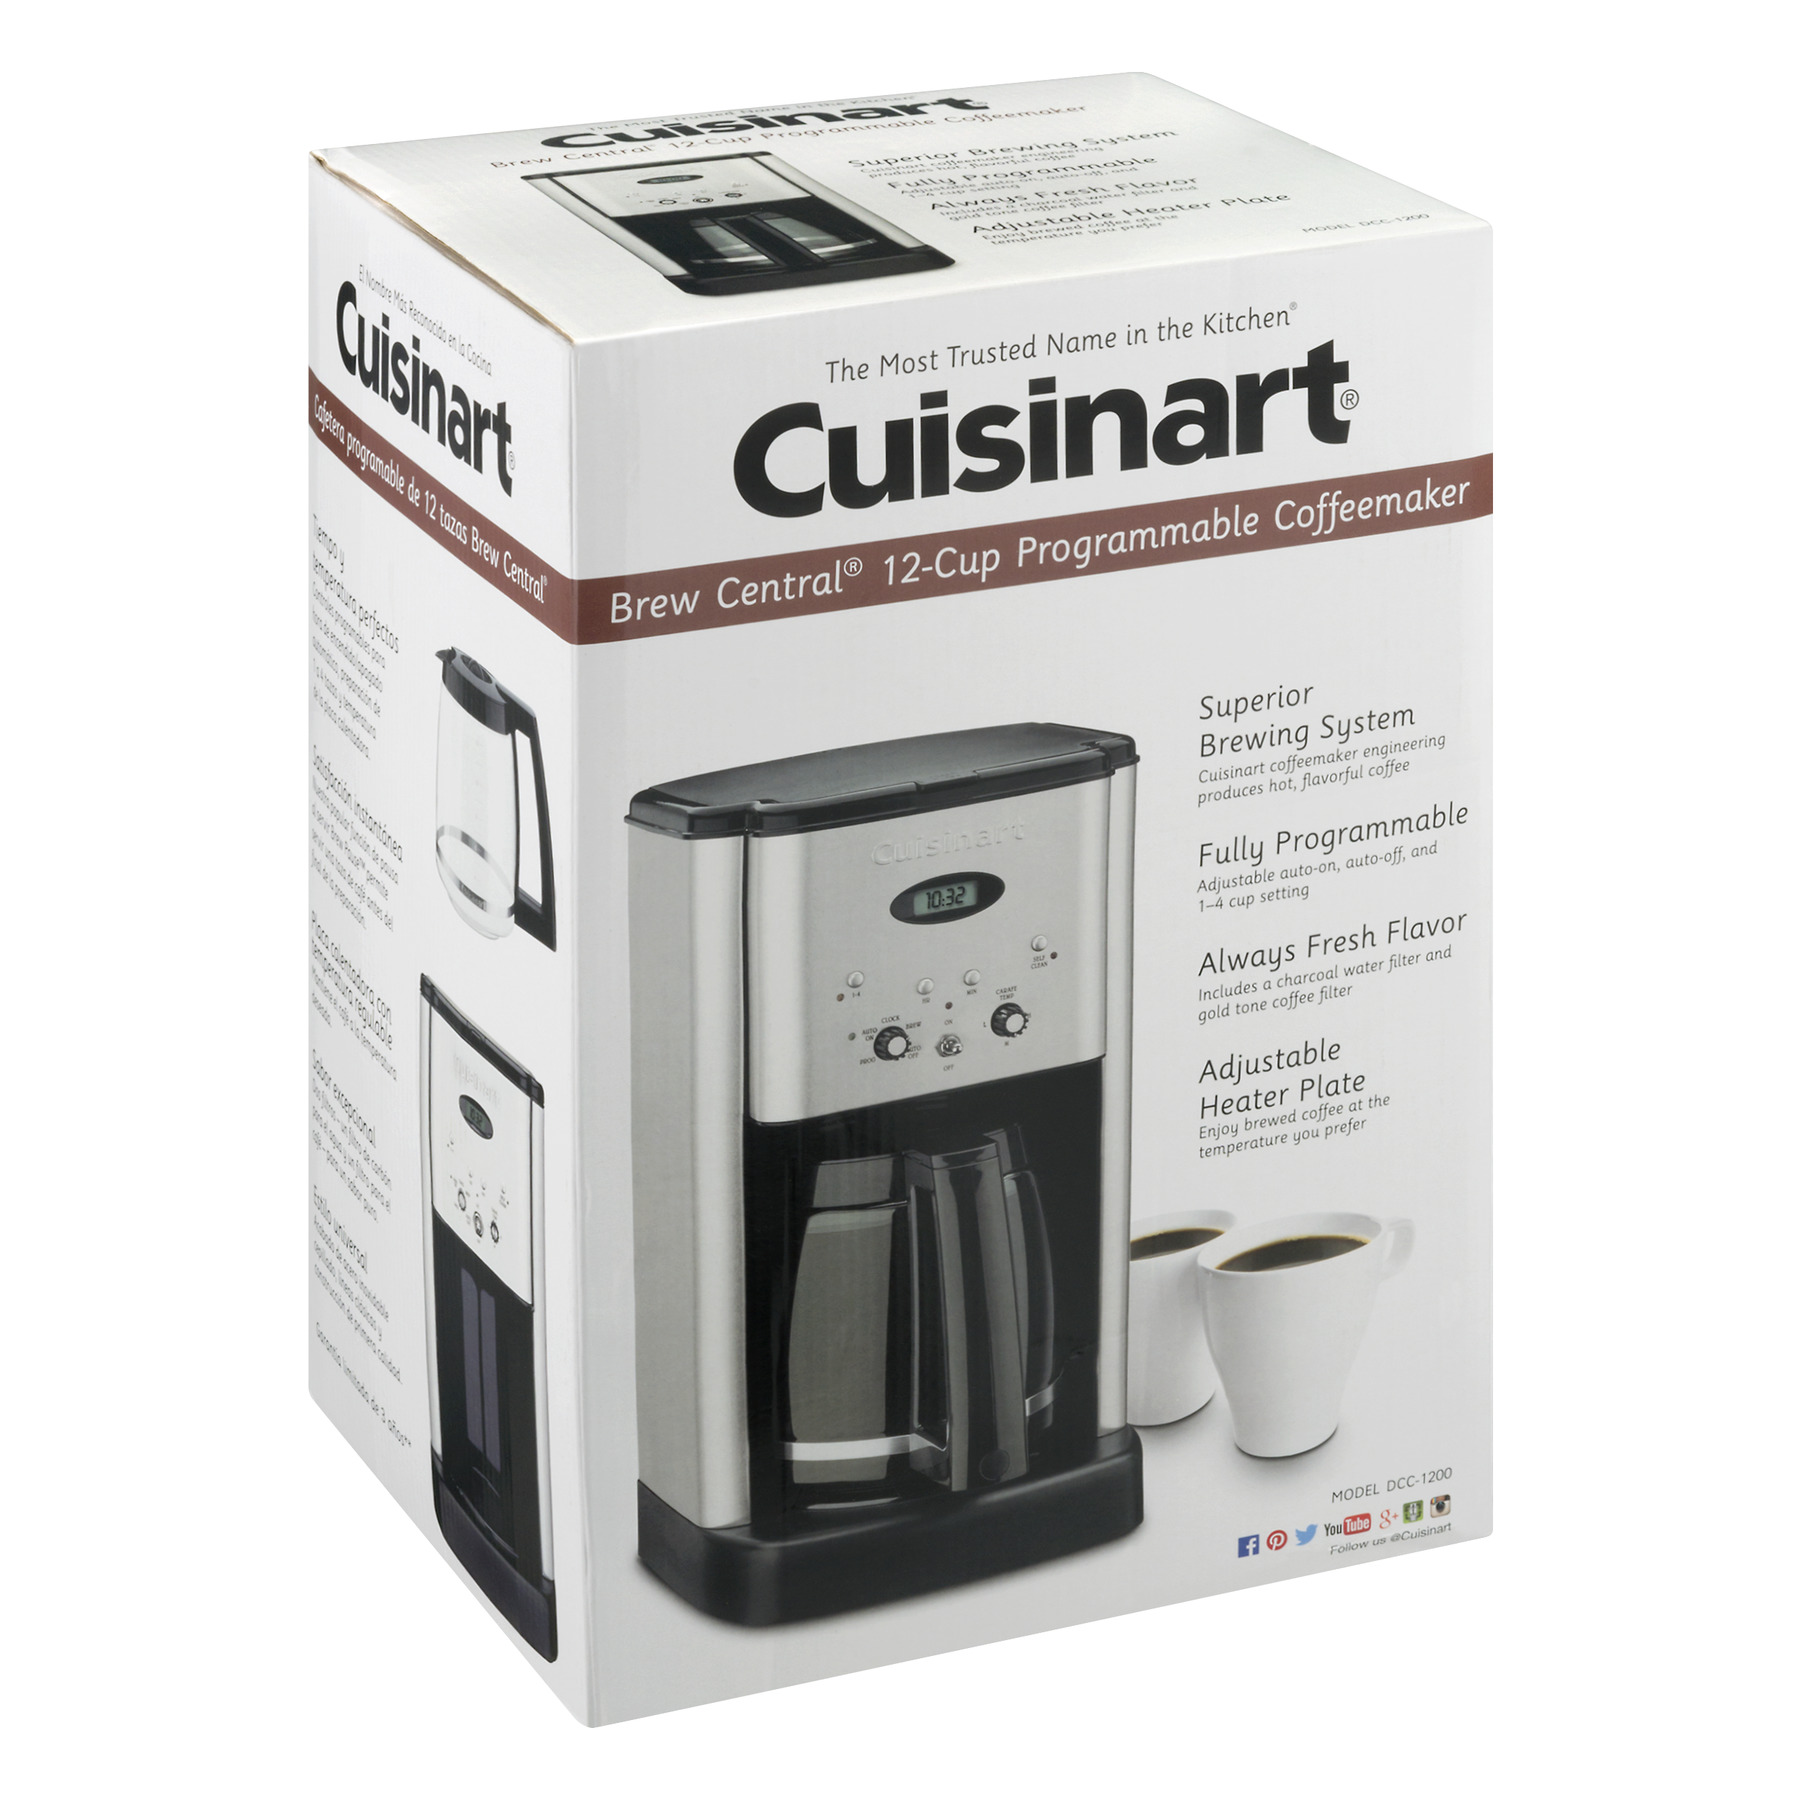 Cuisinart Brew Central™ 12 Cup Programmable Coffeemaker, DCC-1200WM1 - image 3 of 7